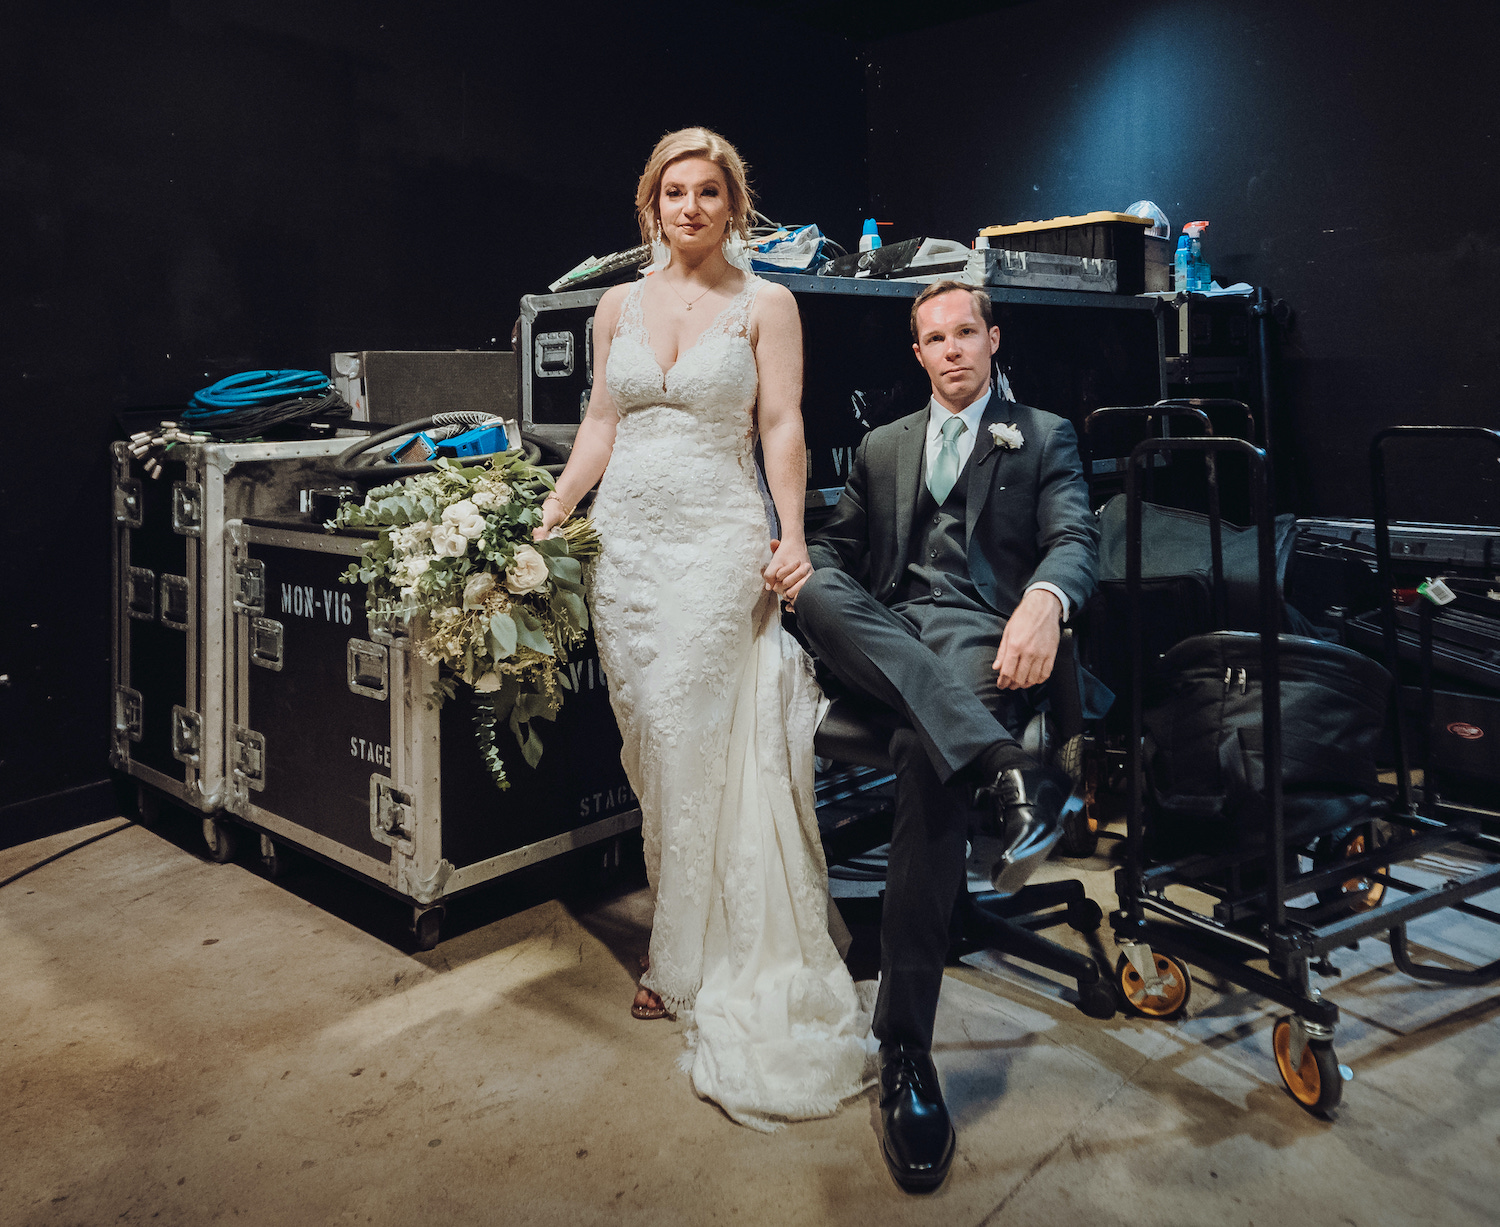 A bride and groom pose in front of musical equipment at their concert style venue.